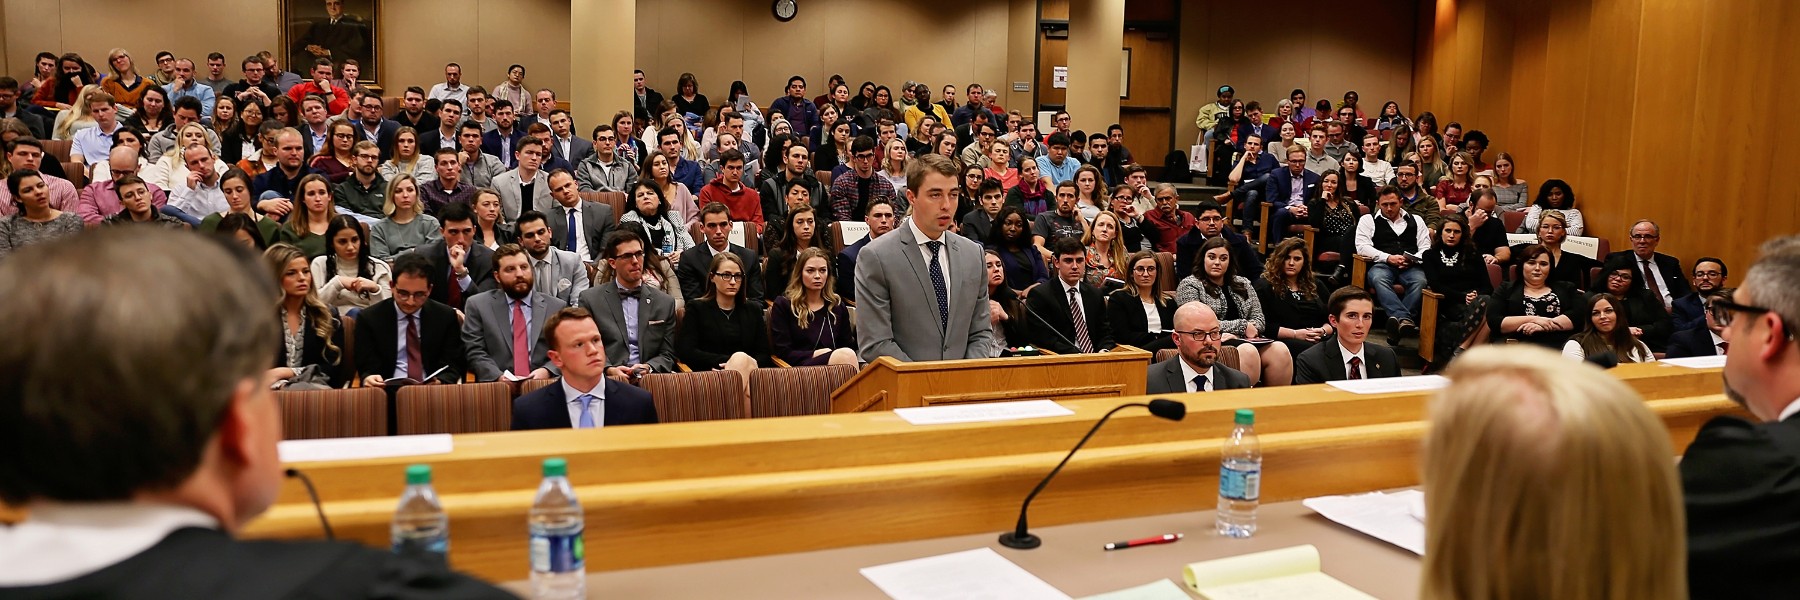 Sherman Minton Moot Court Competition at the Maurer School of Law. A single student in a suit speaks before a panel of judges with a large audience behind him.